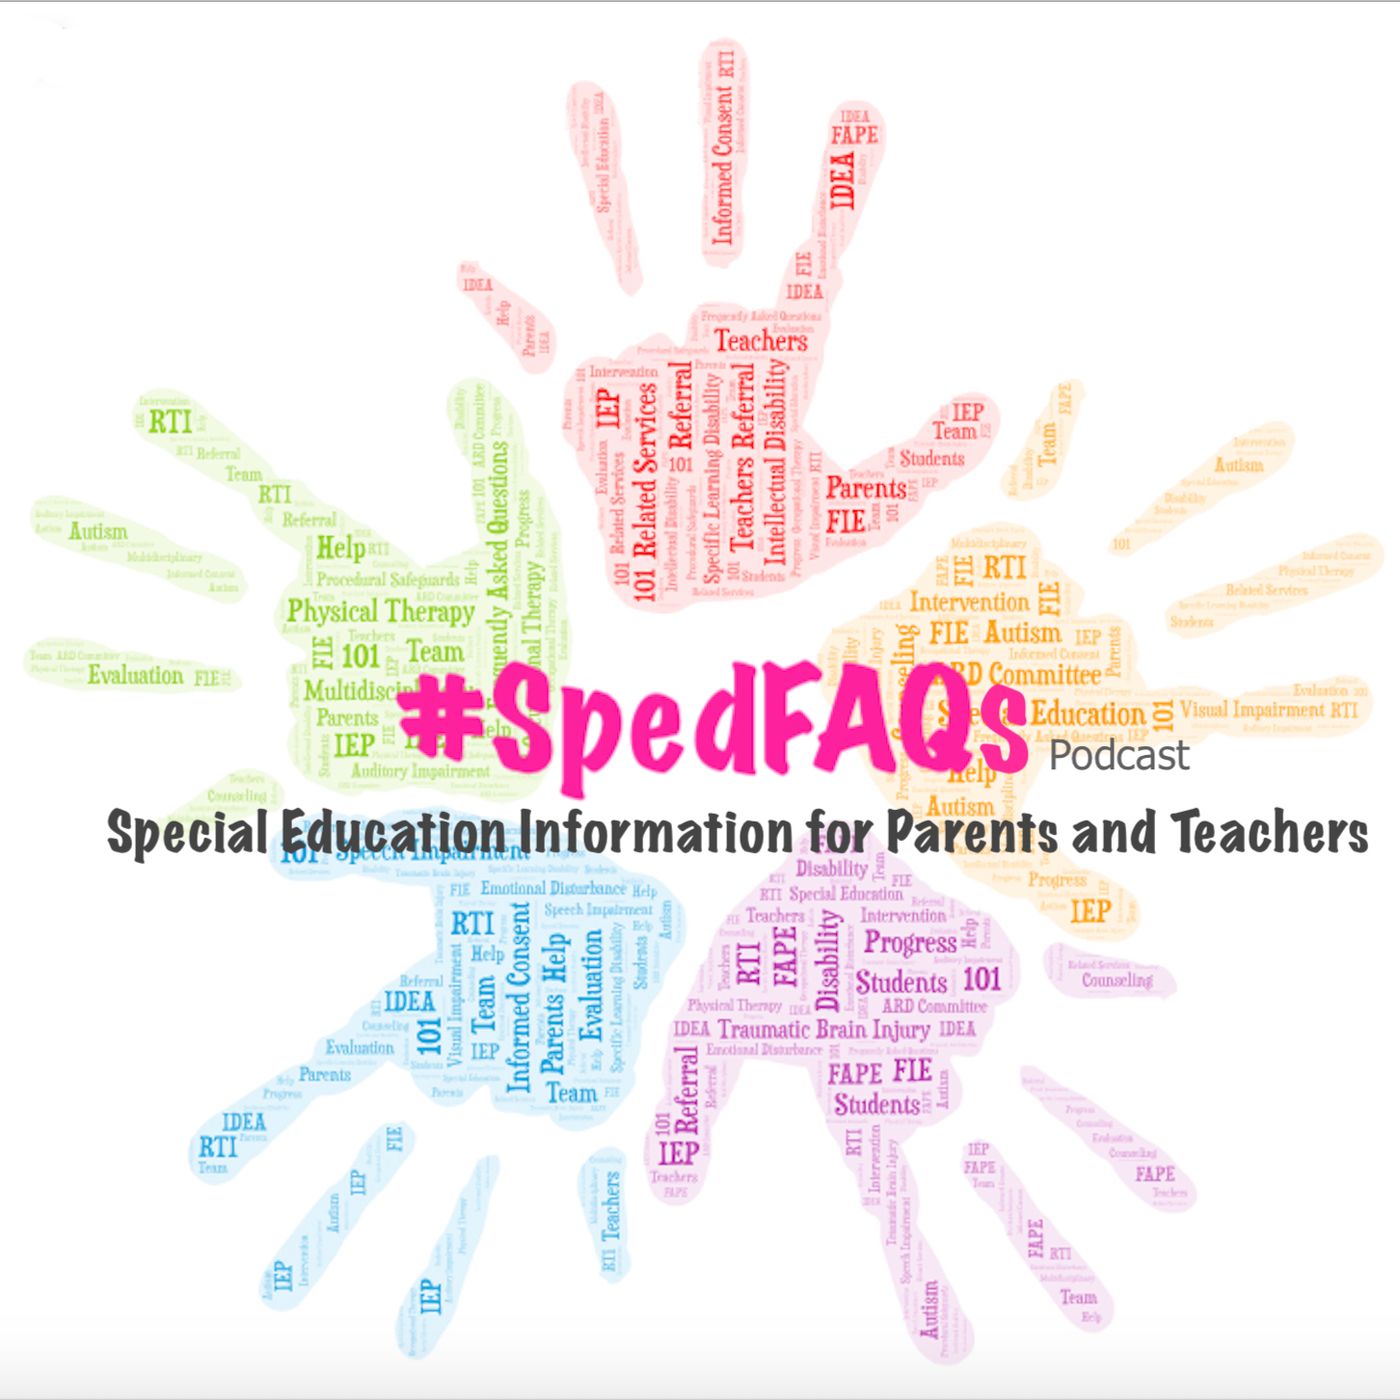 #SpedFAQs Episode 2 PS and Guide to ARD Process.mp3 - 2:25:19, 9.06 PM